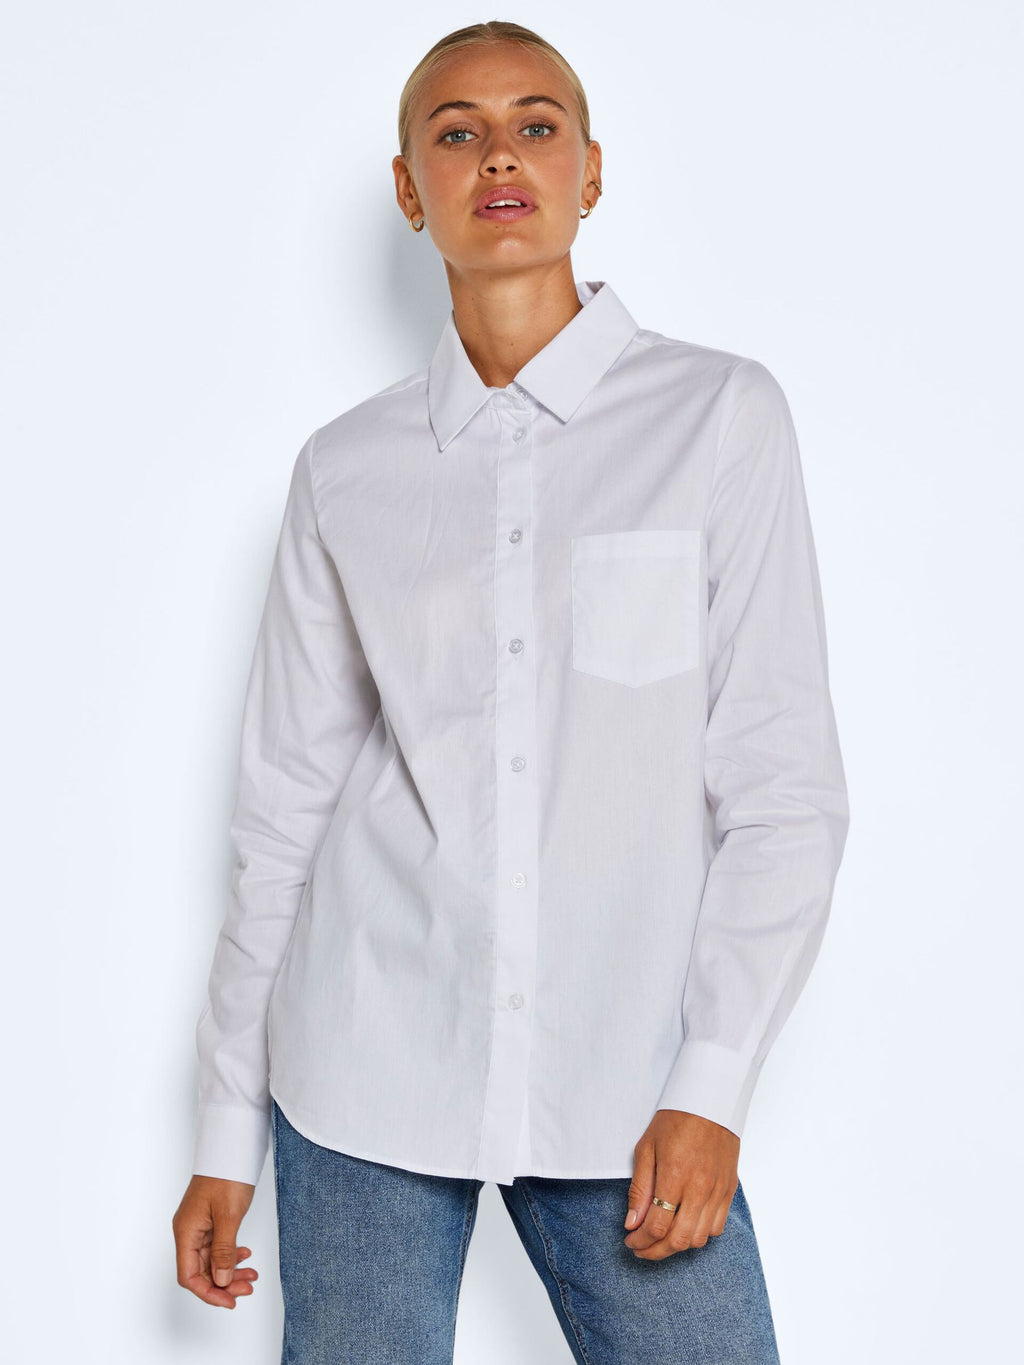 Noisy May whitney classic white cotton shirt featuring Front pocket detail, Pointed collar, Long sleeves with button fastening at cuffs, Button fastenings through front , Regular fit